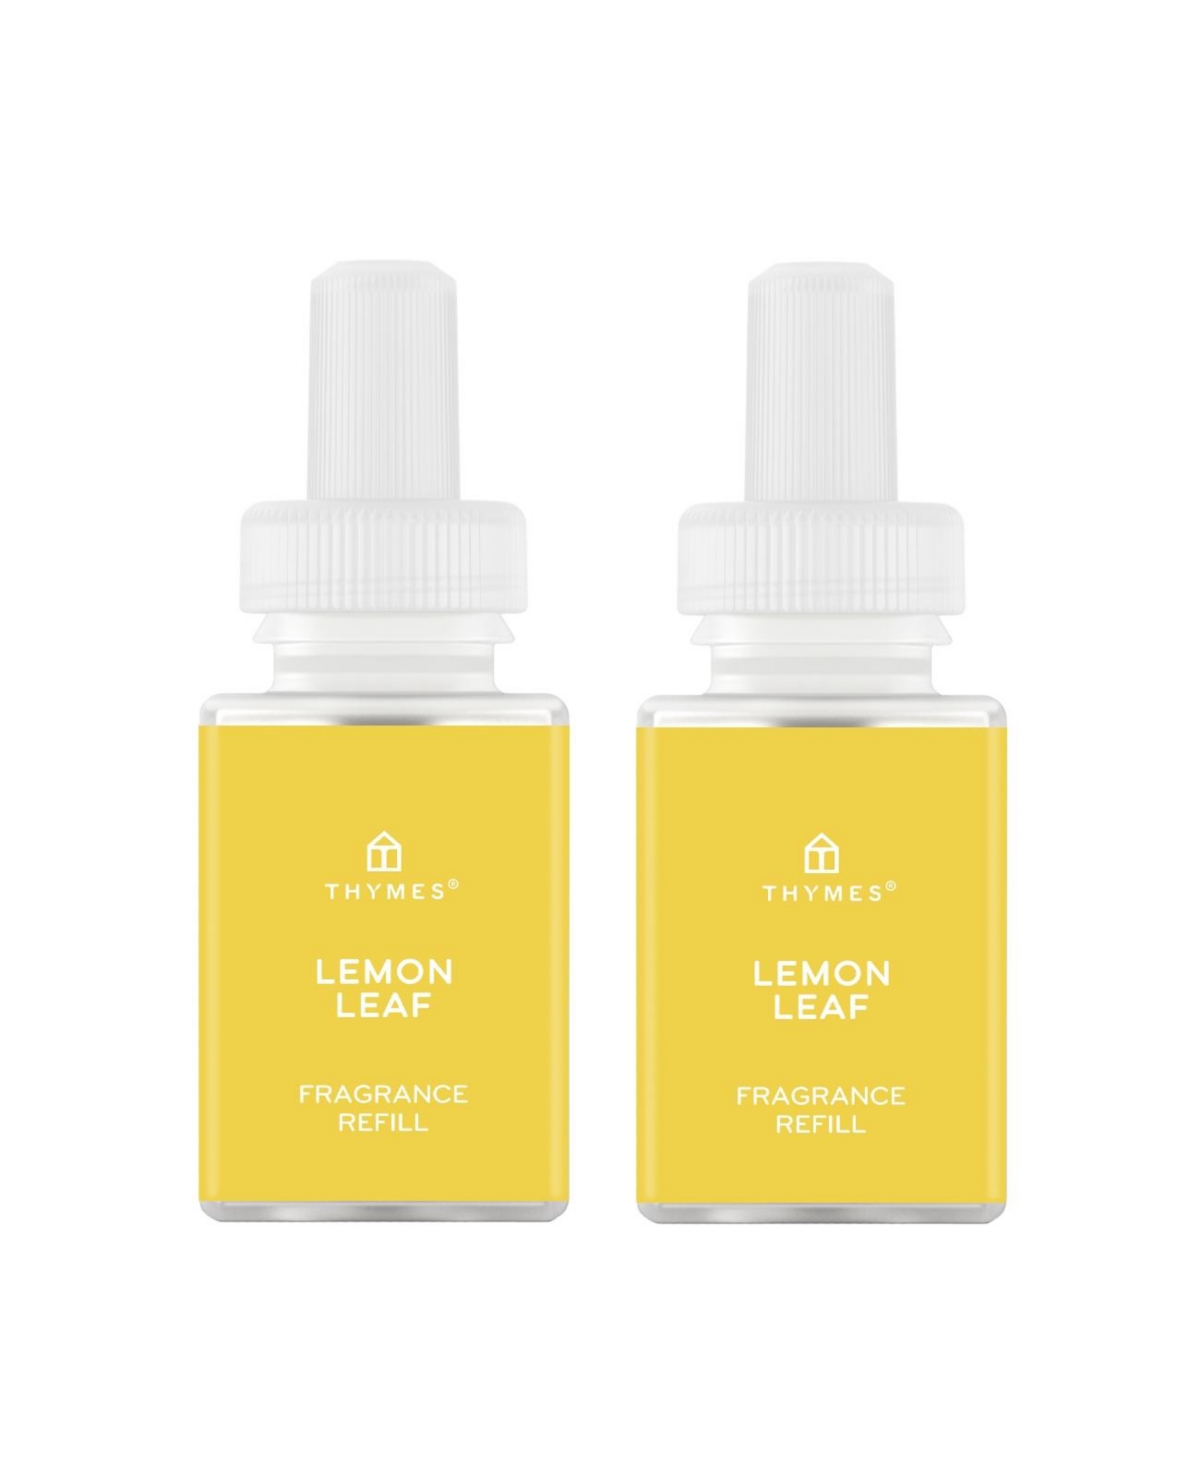 and Thymes - Lemon Leaf - Fragrance for Smart Home Air Diffusers - Room Freshener - Aromatherapy Scents for Bedrooms & Living Rooms - 2 Pack